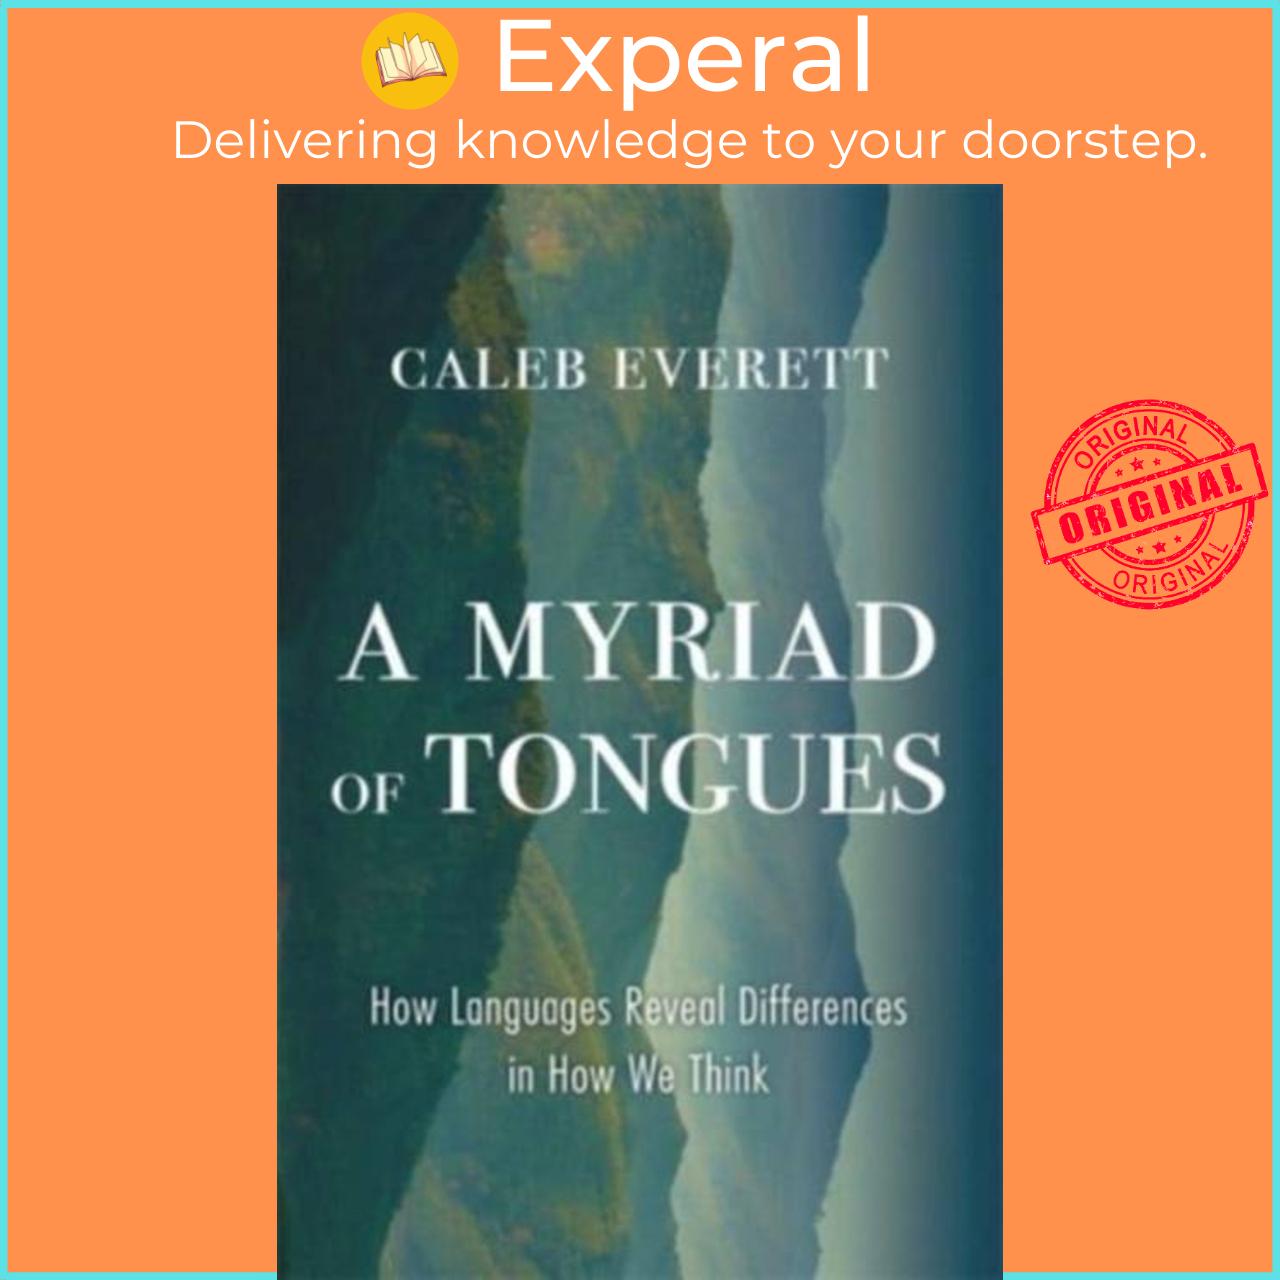 Sách - A Myriad of Tongues - How Languages Reveal Differences in How We Think by Caleb Everett (UK edition, hardcover)